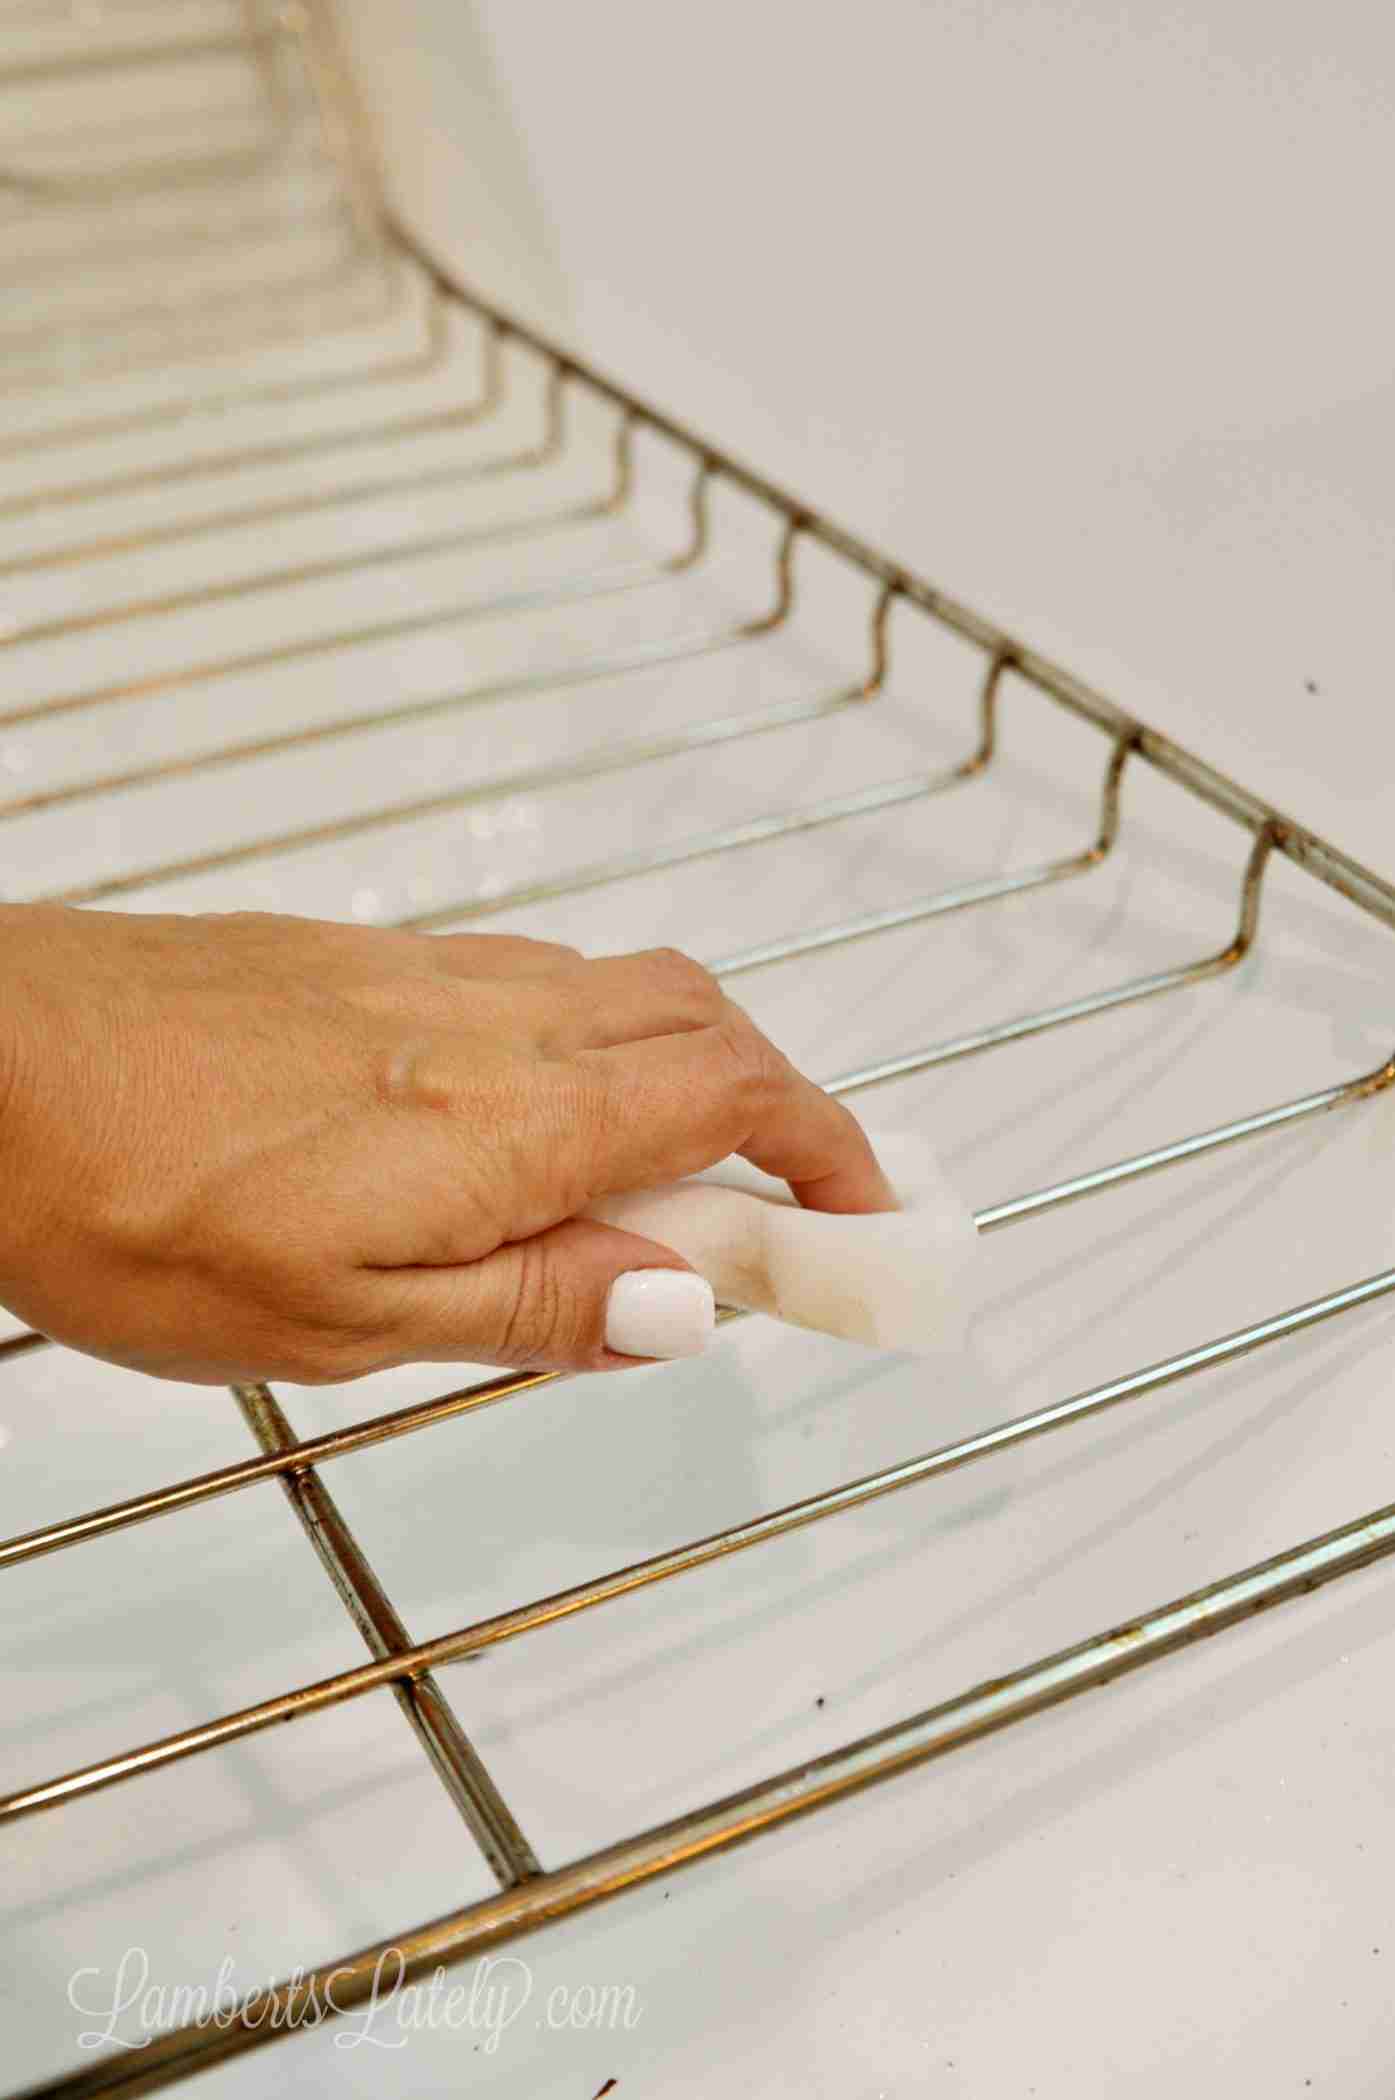 scrubbing an oven rack with a melamine sponge